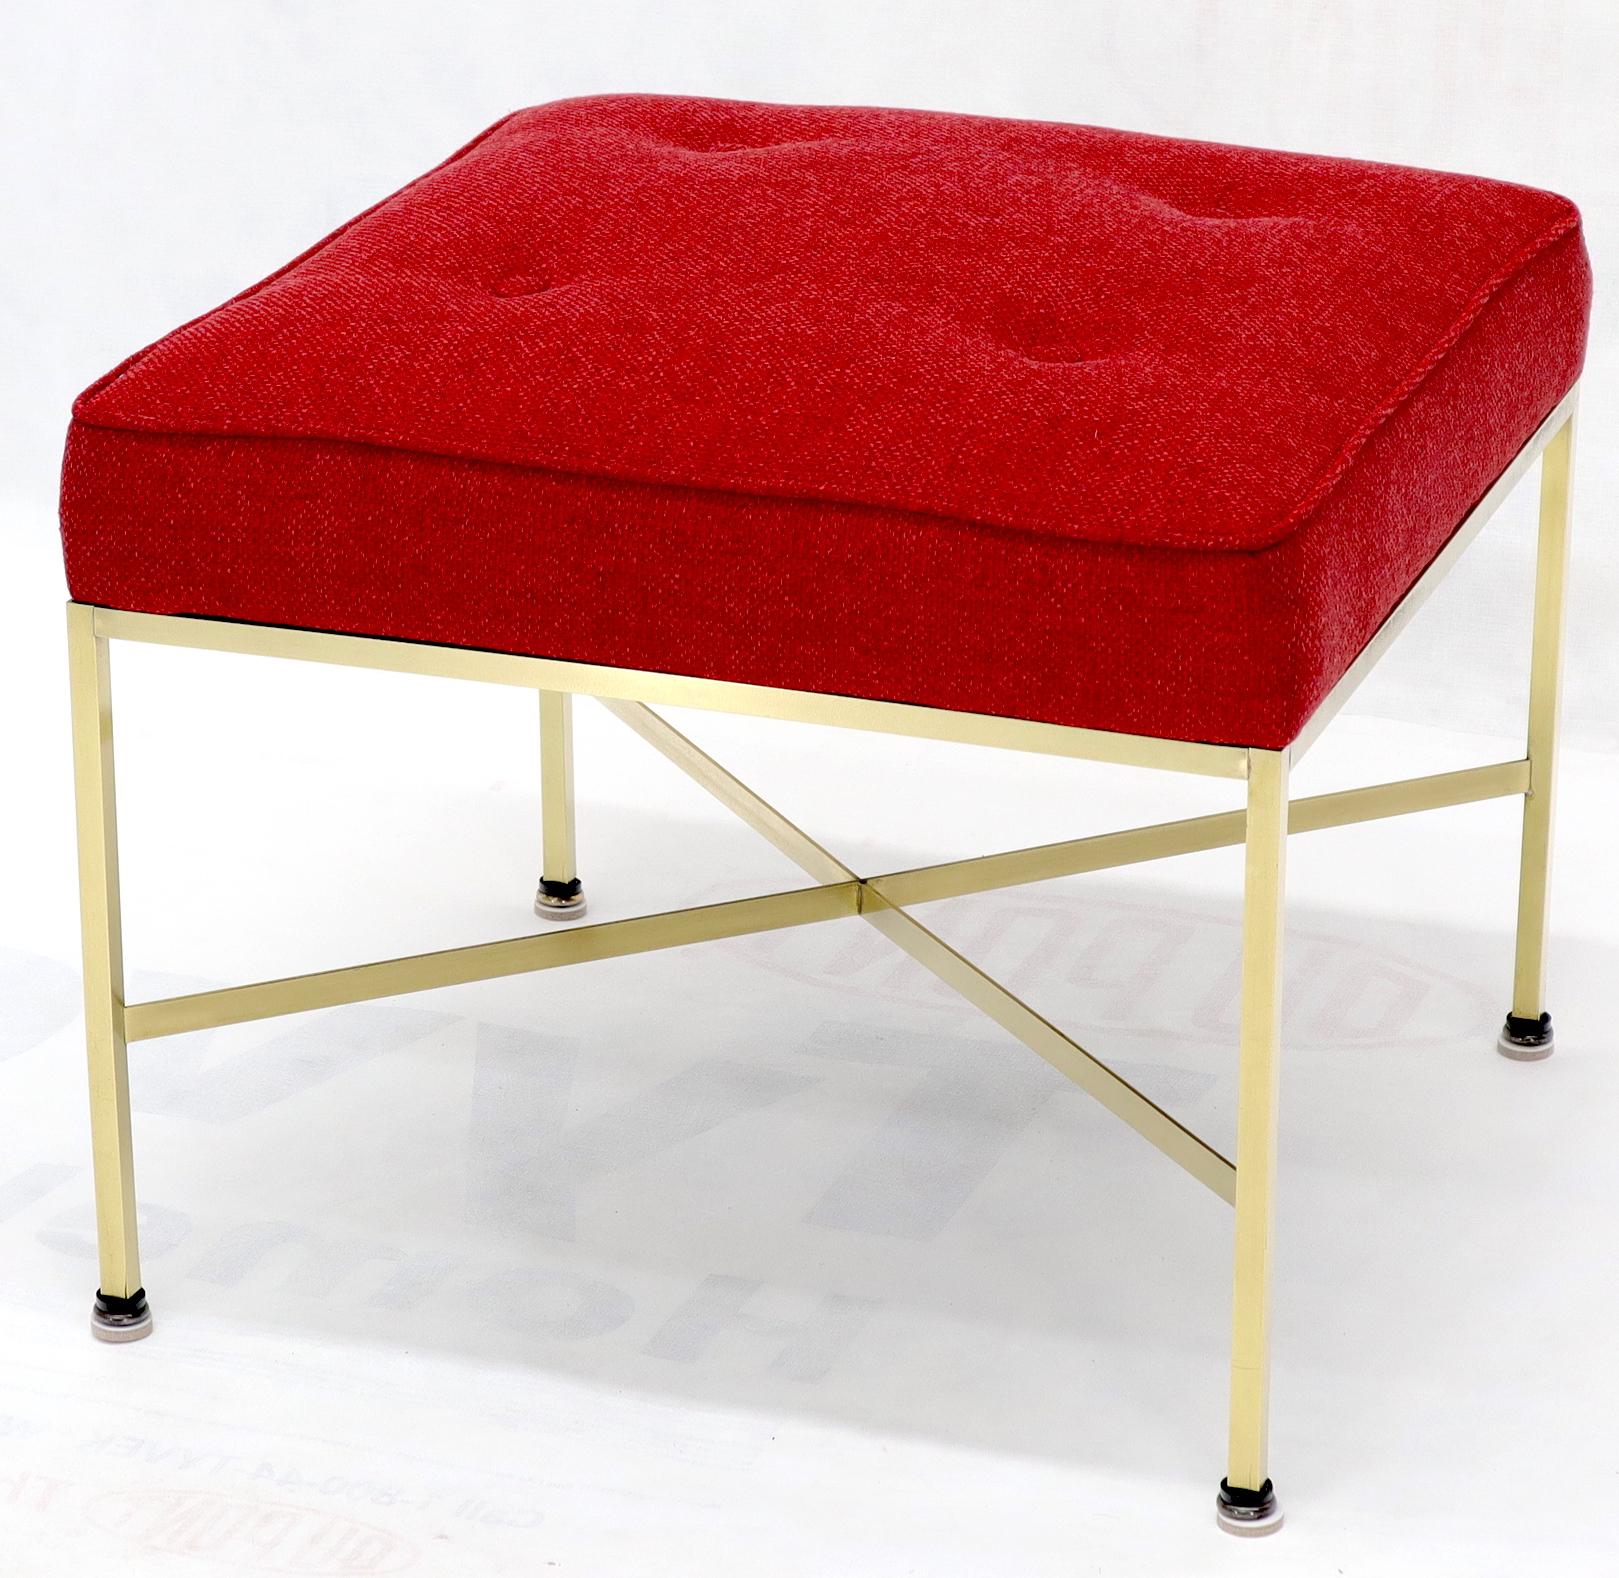 20th Century Pair of New Red Upholstery Square Brass Frames Benches Stools by Paul McCobb For Sale